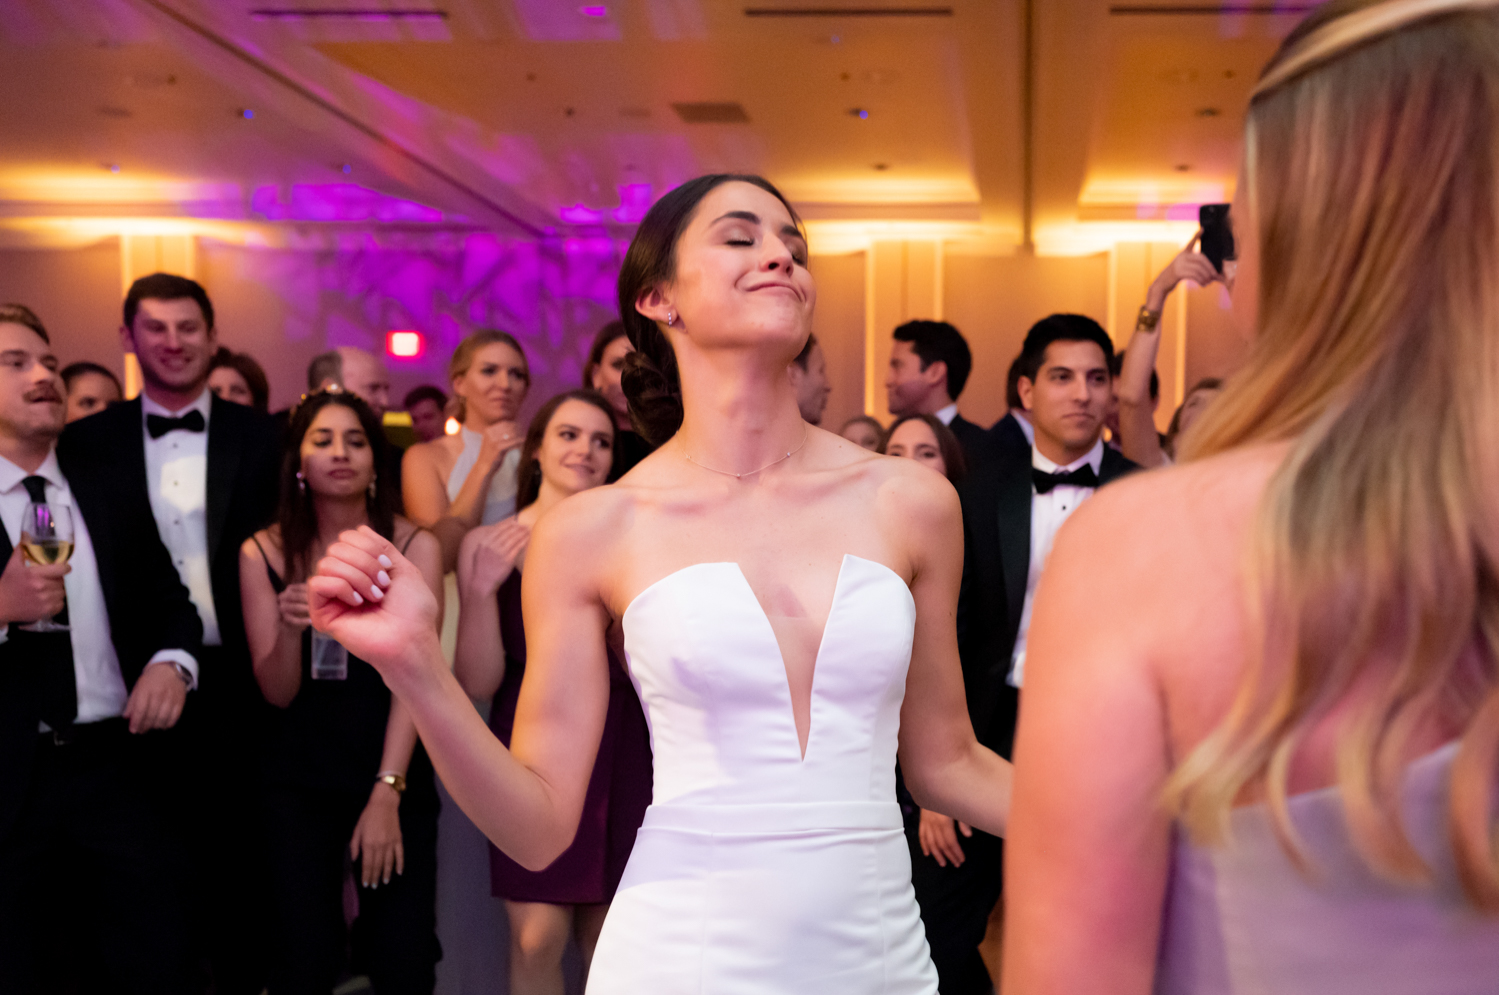 The bride dances with her friends at the reception.